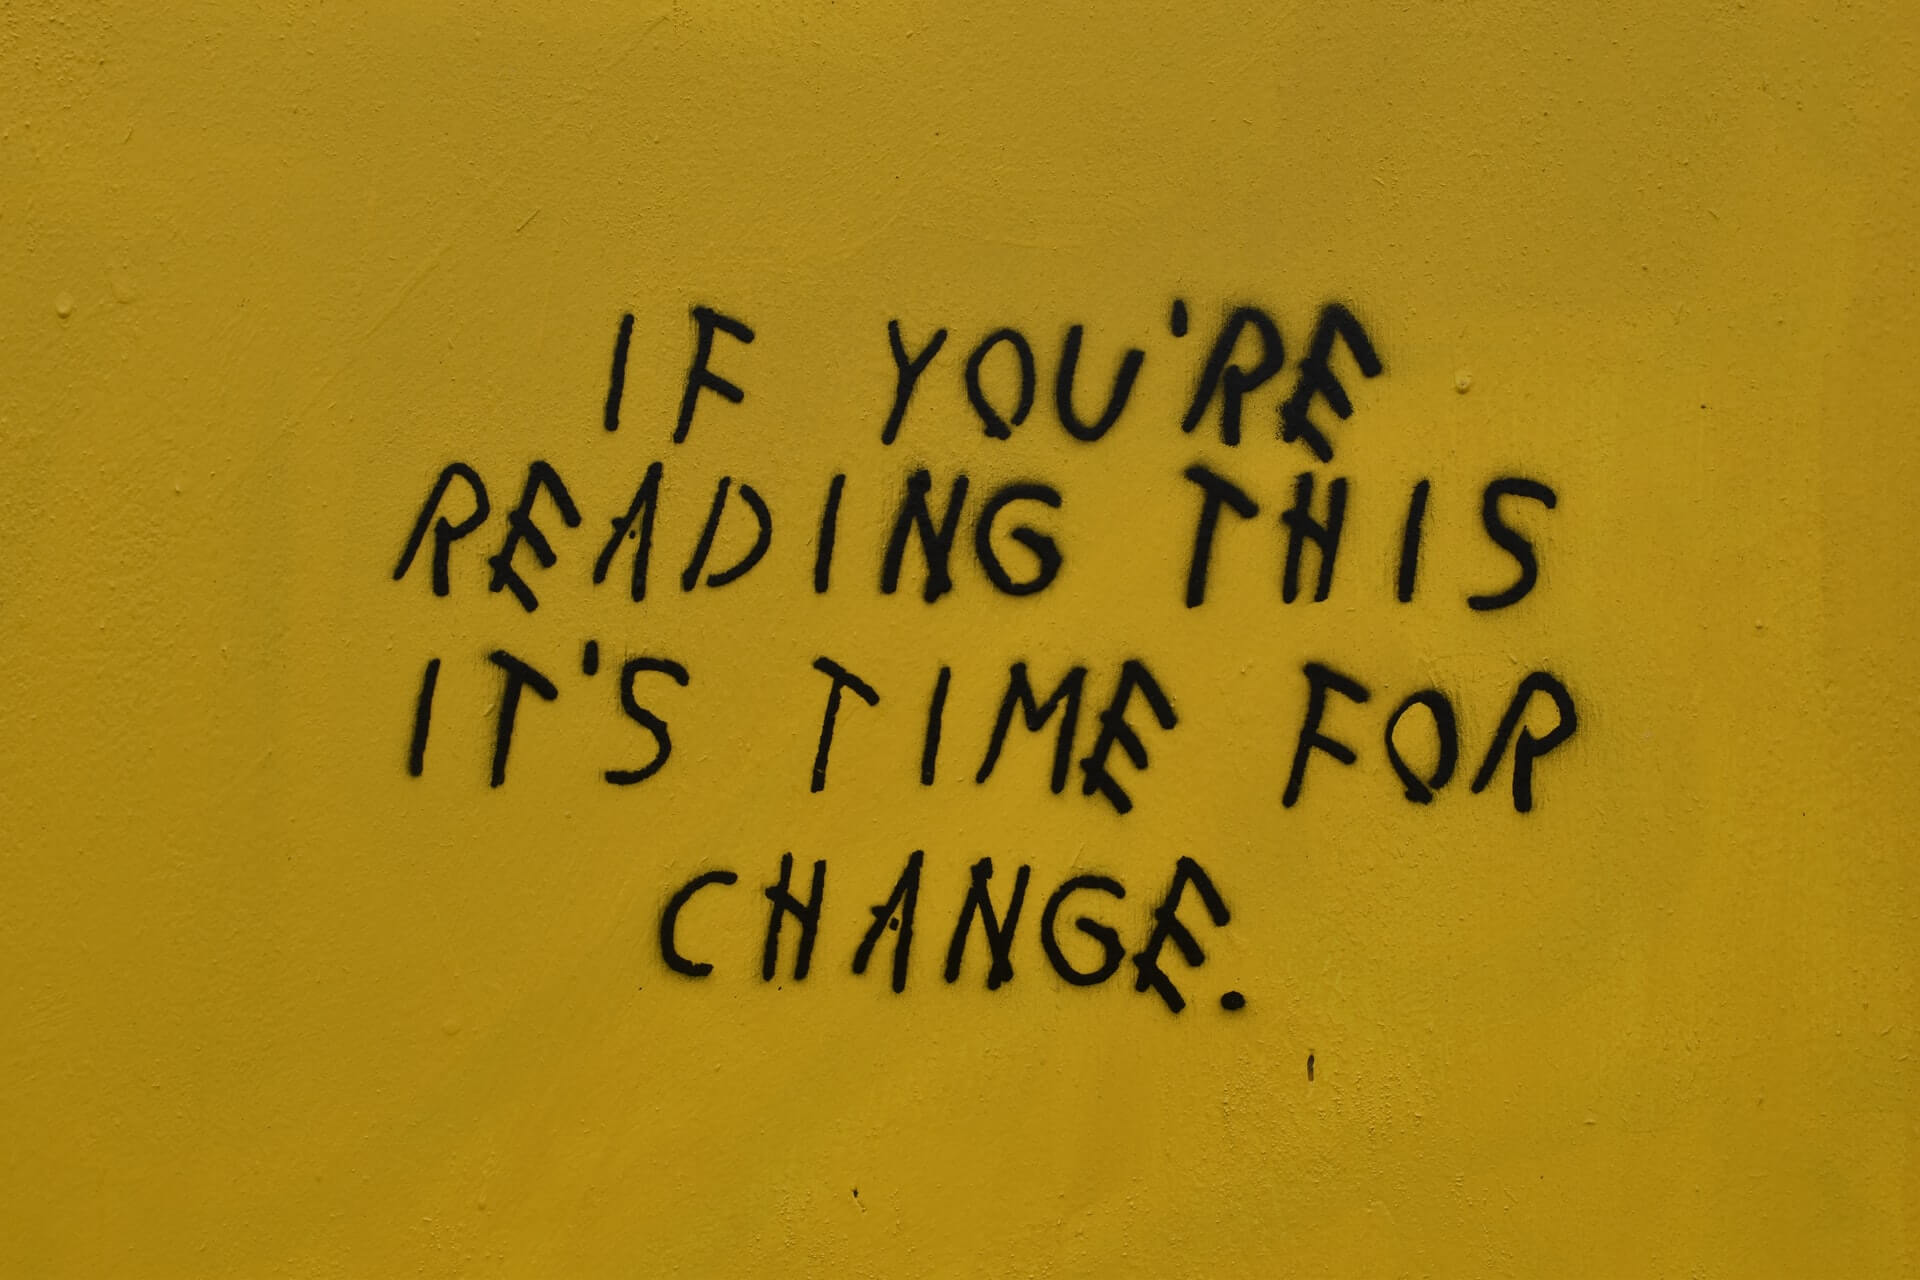 A quote on change on a yellow background